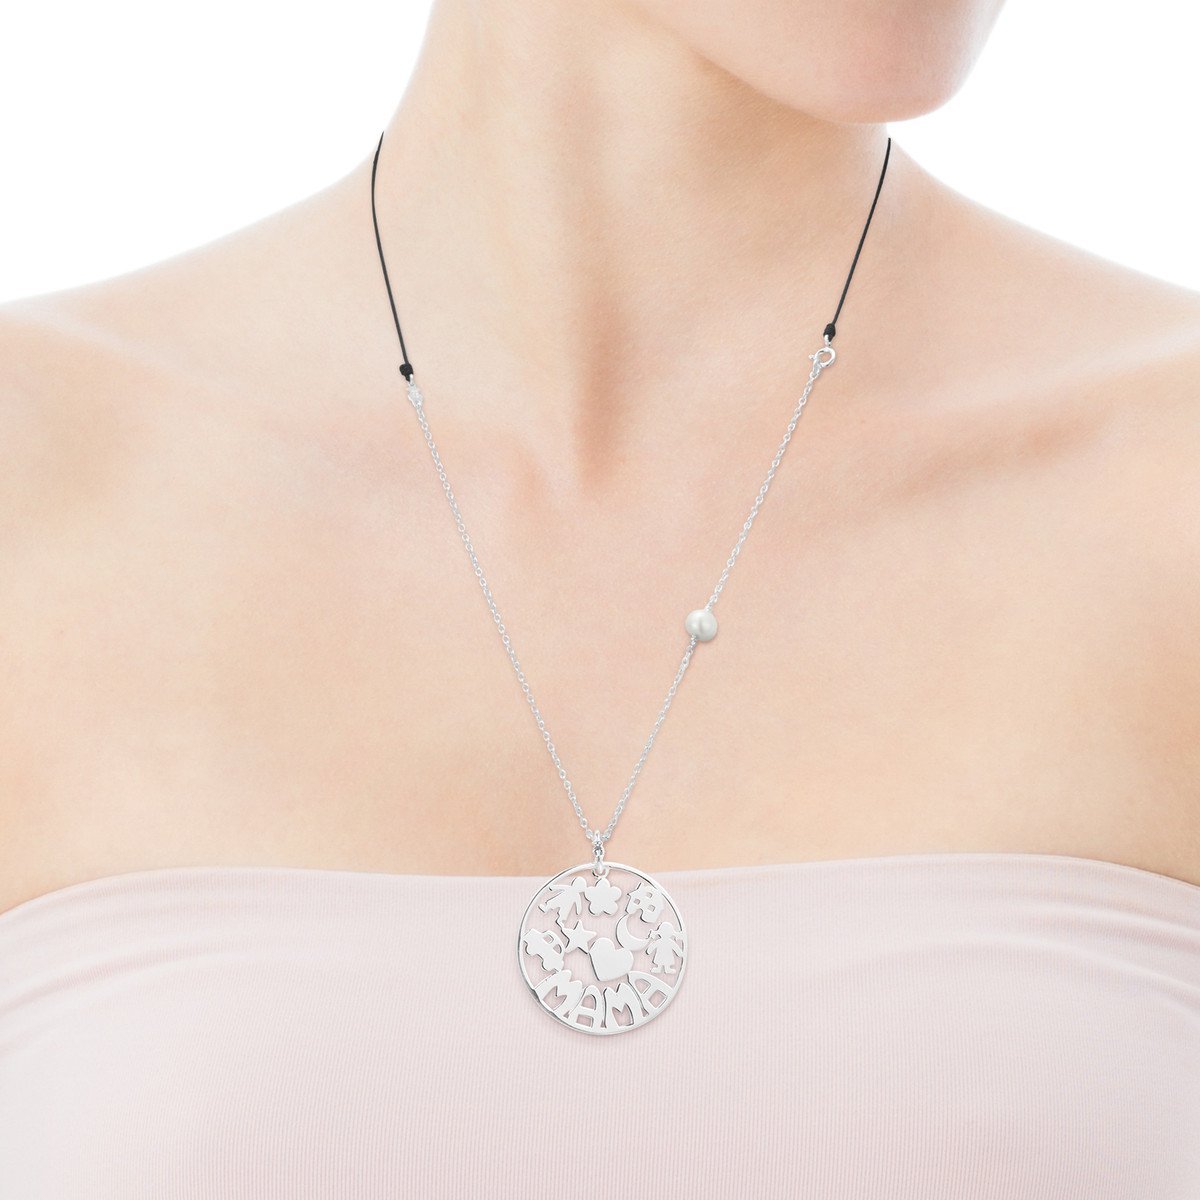 Tous Mama Necklace in Silver and black cord 914154550